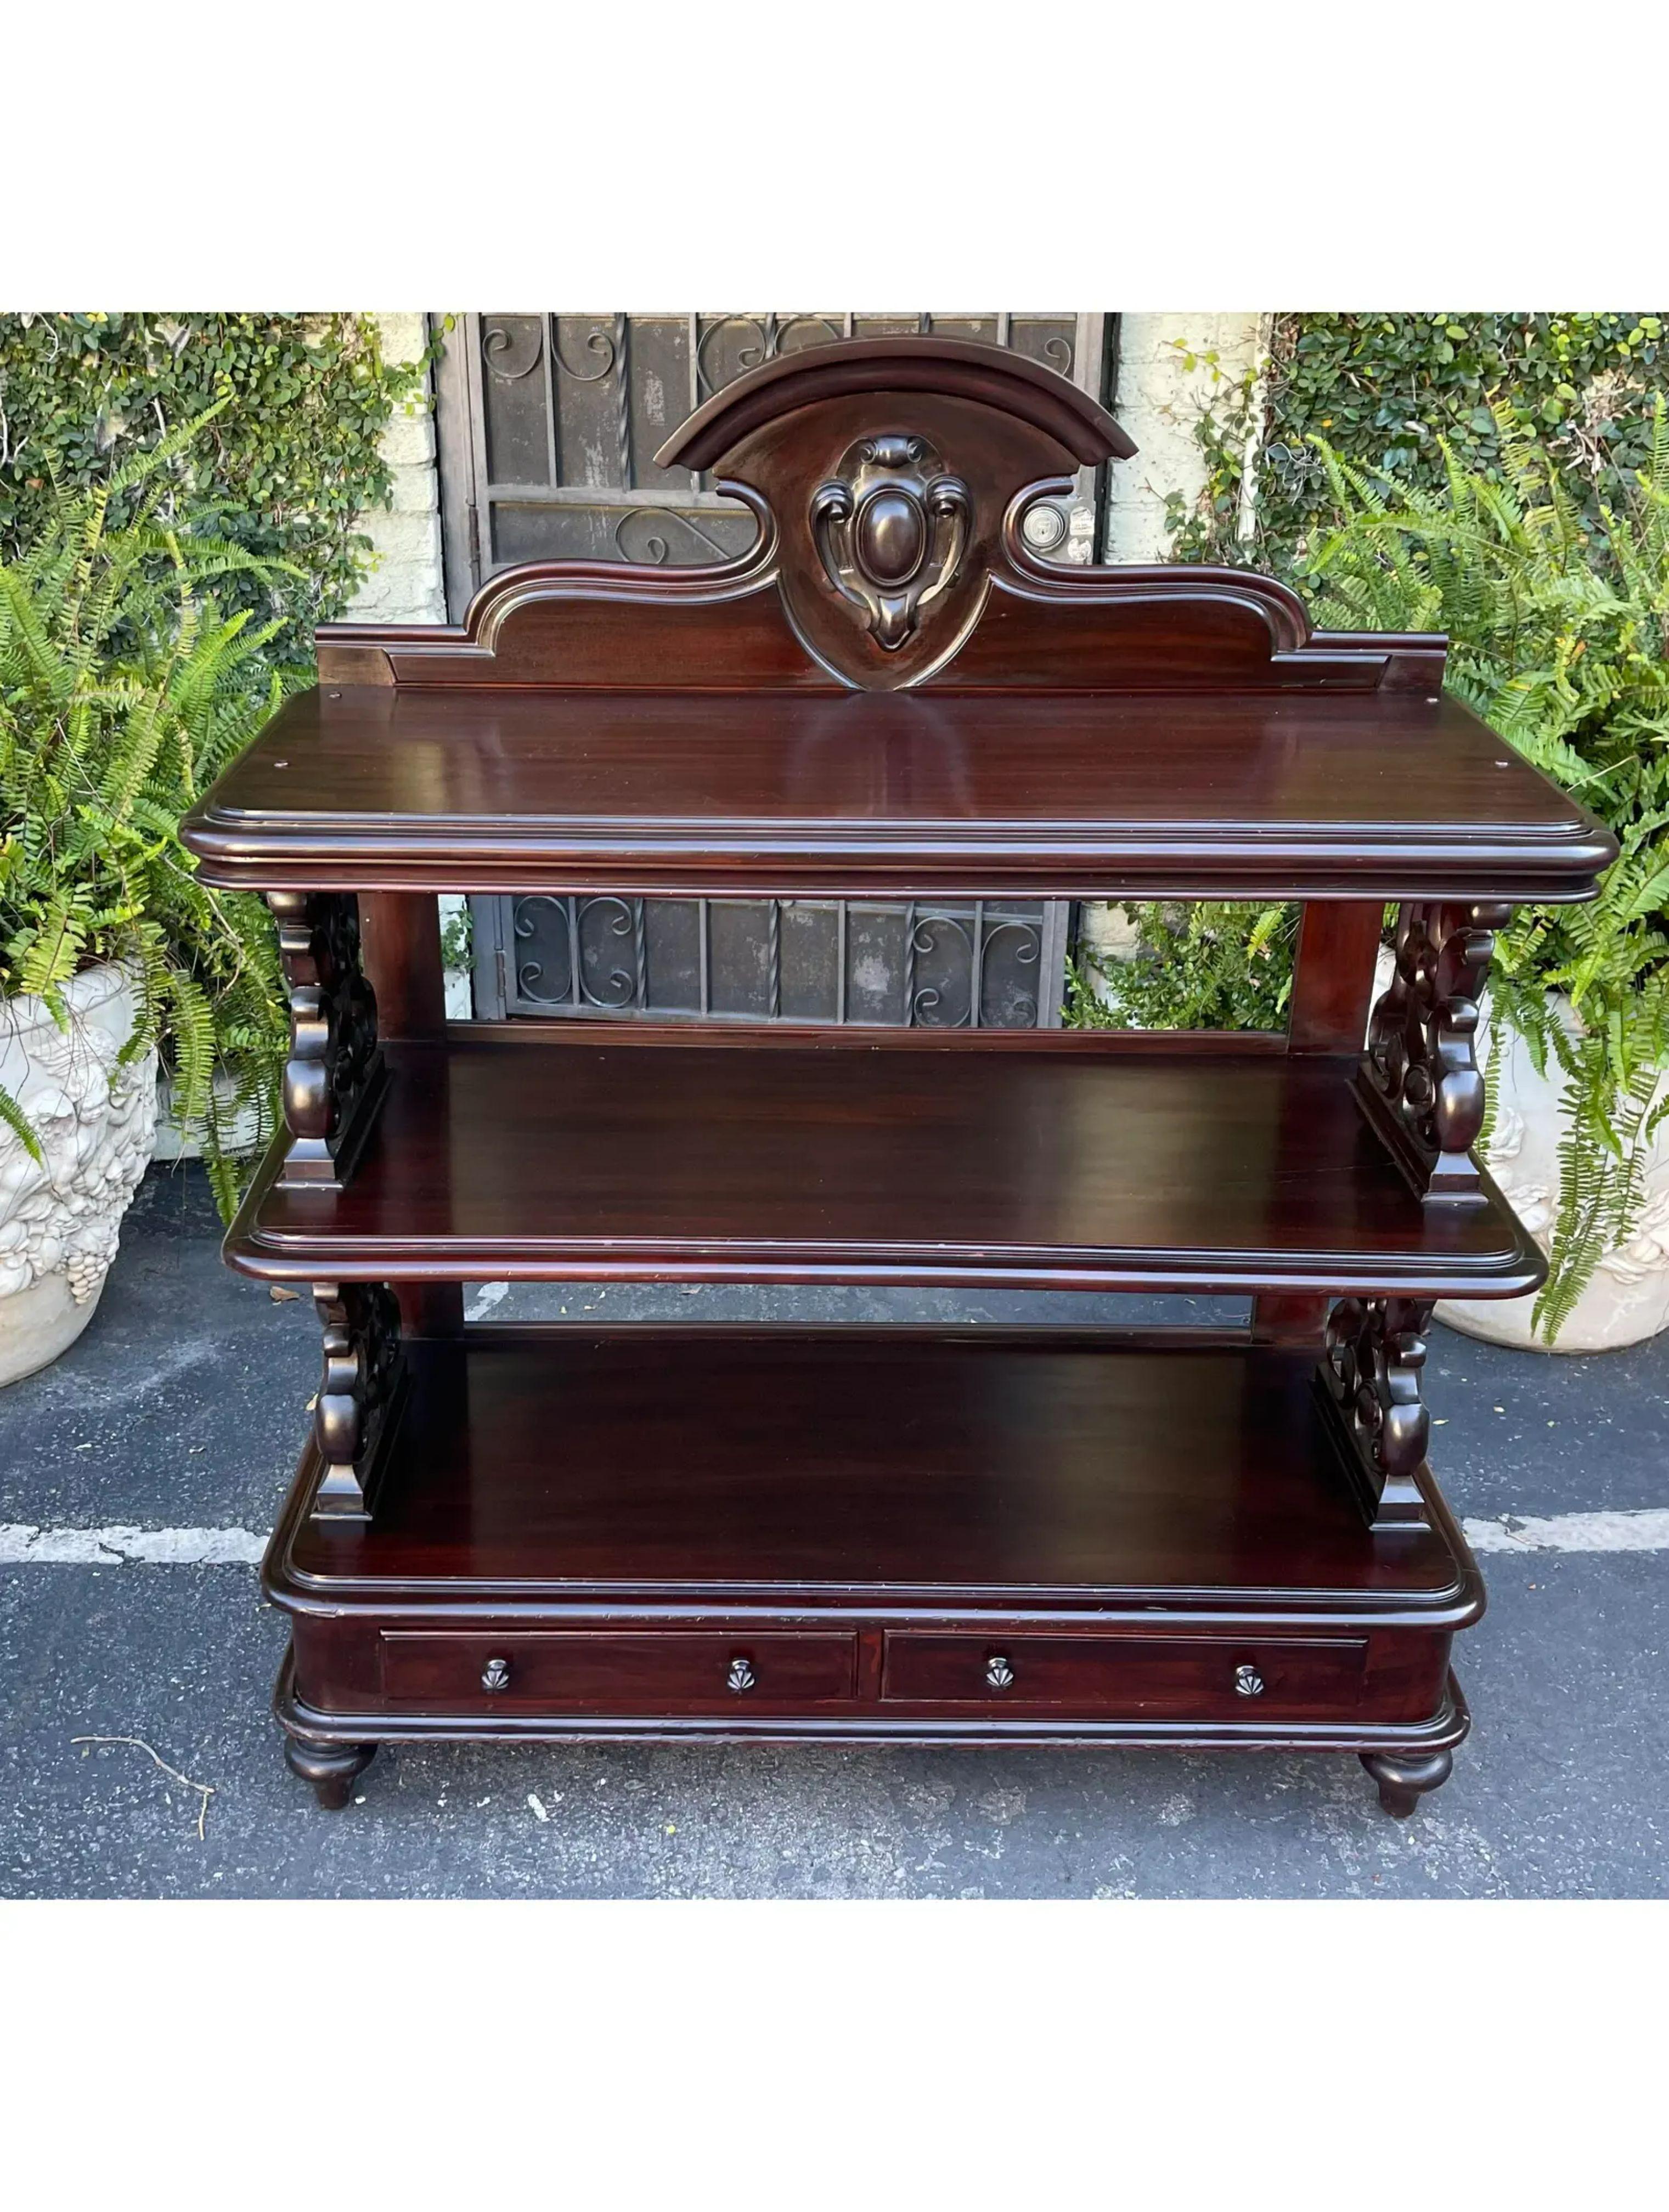 Antique English mahogany three tier sideboard server

Additional information: 
Materials: mahogany
Please note that this item contains materials that are legally subject to a special export process that may extend the delivery time an additional